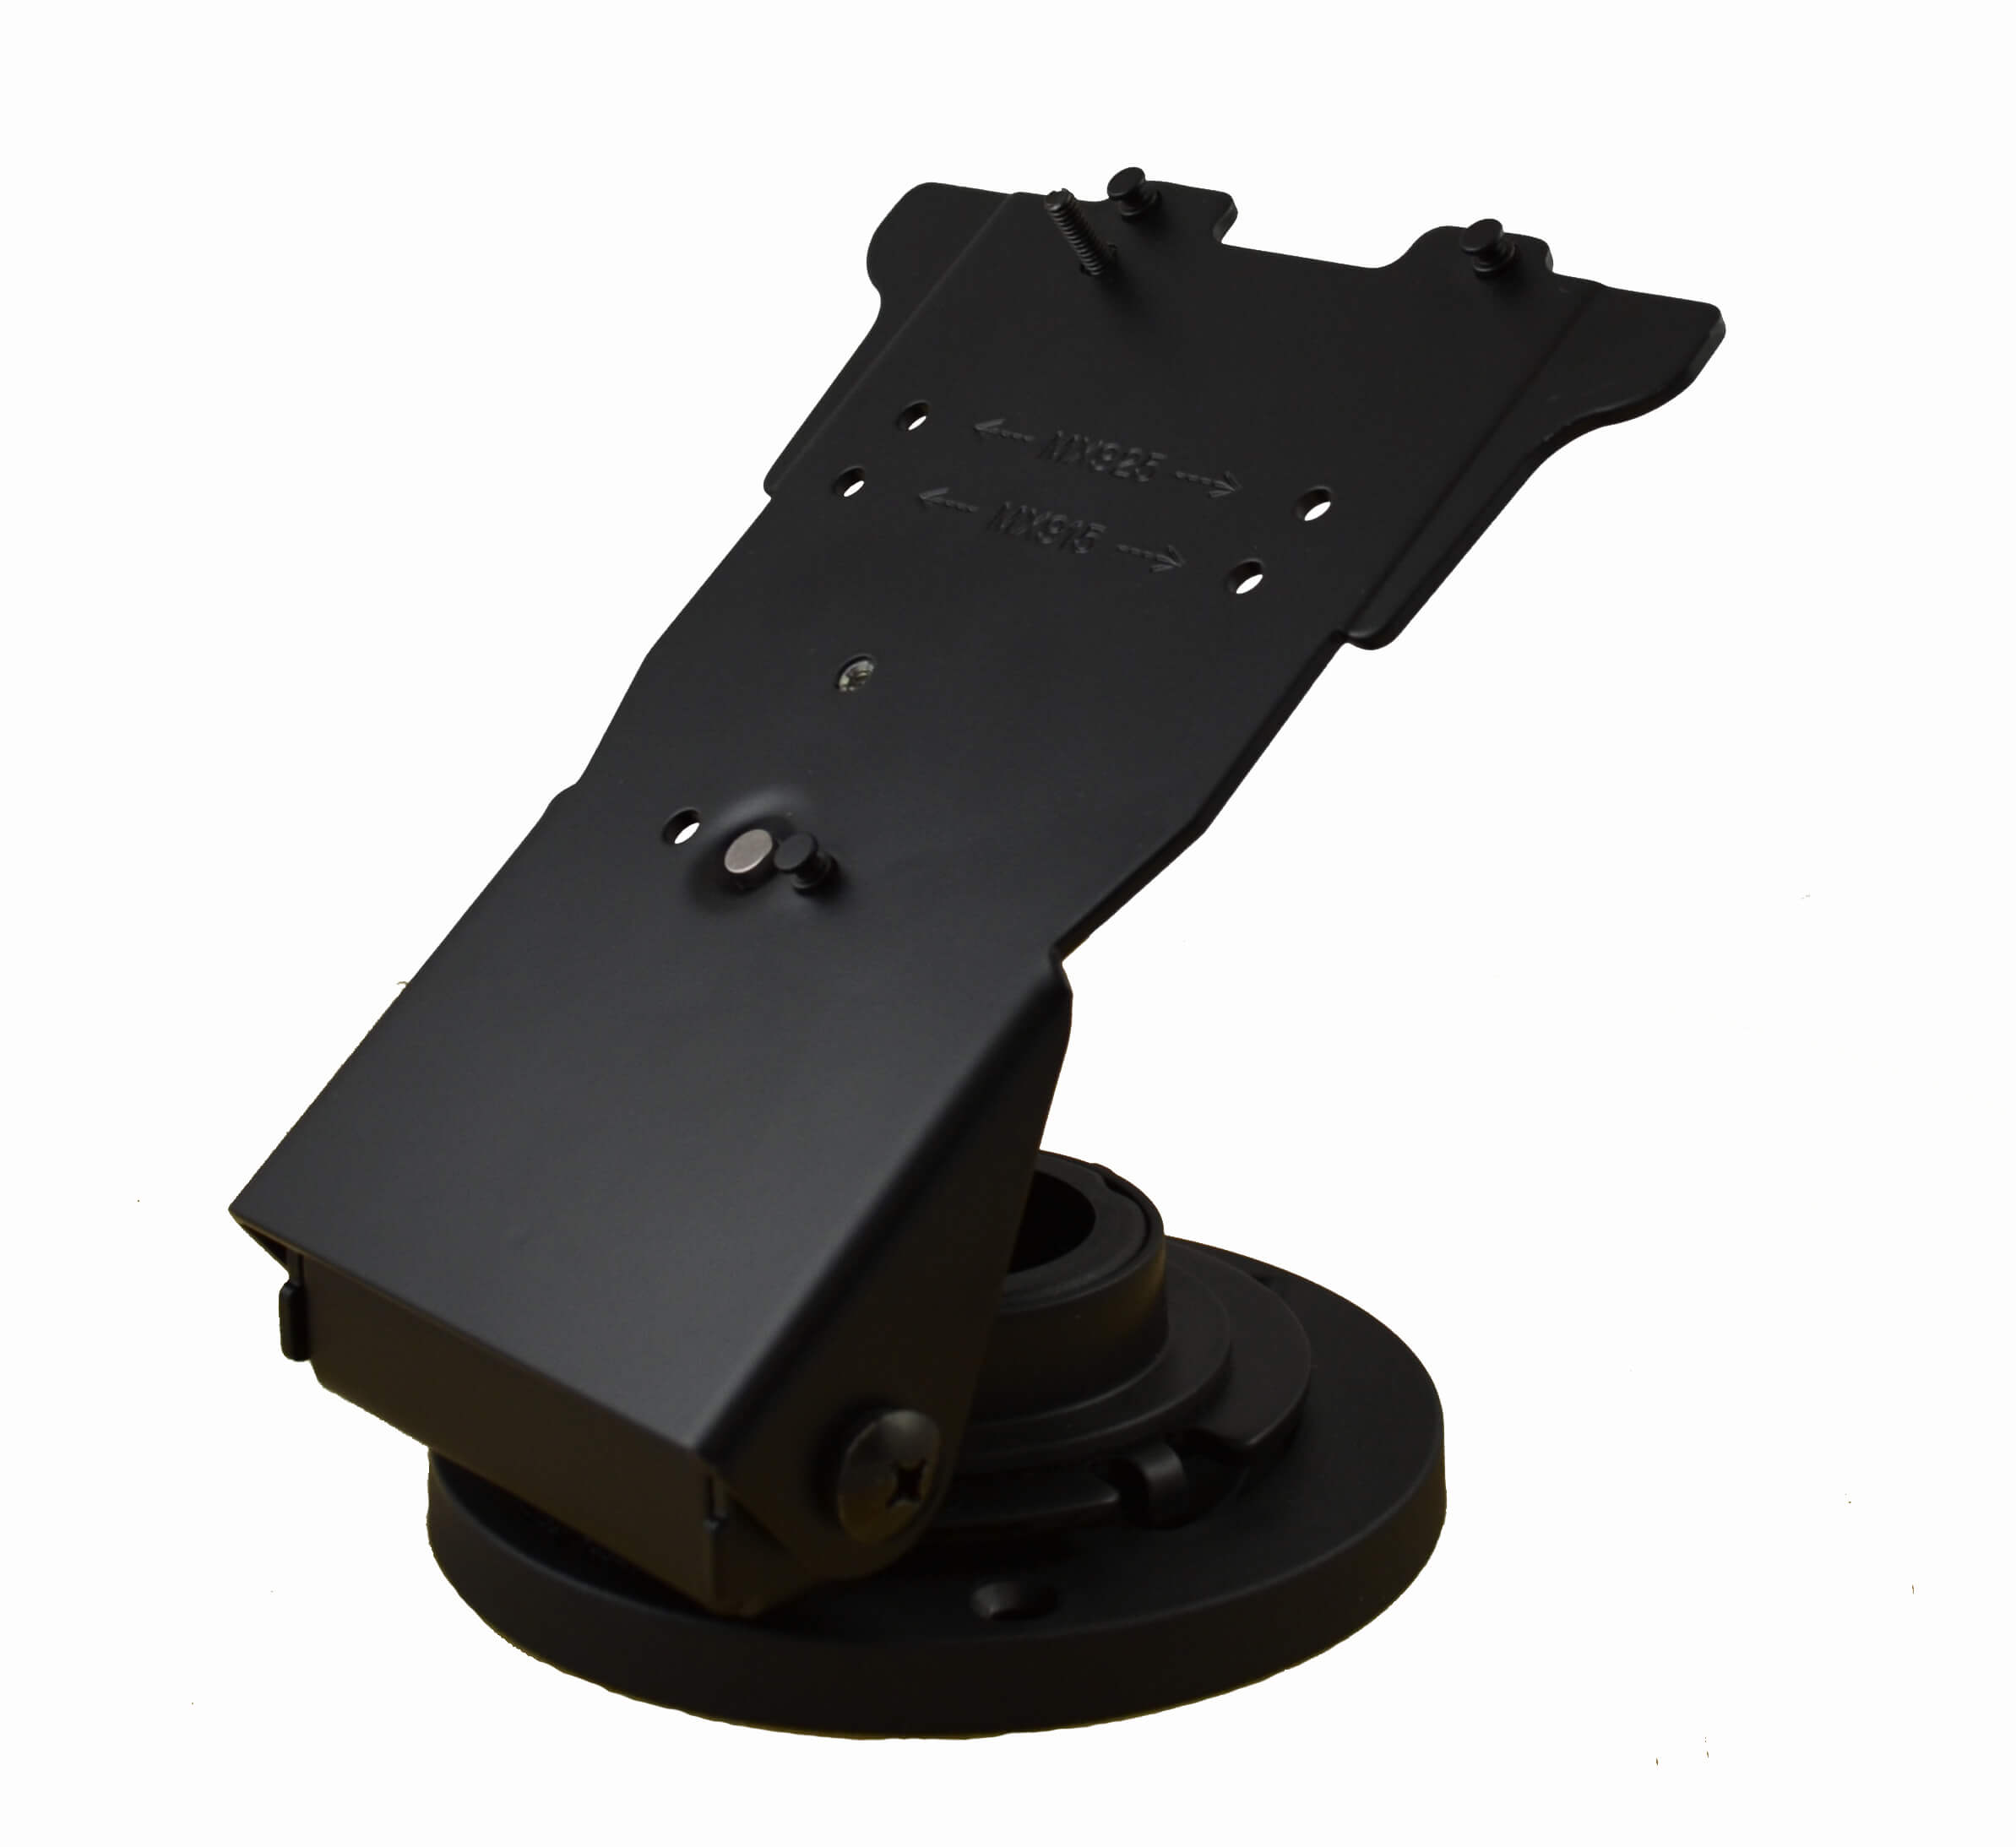 Round Base Metal Stand for Verifone MX915/MX925/M424/M425 and Pax Aries 6/8 Payment Terminals